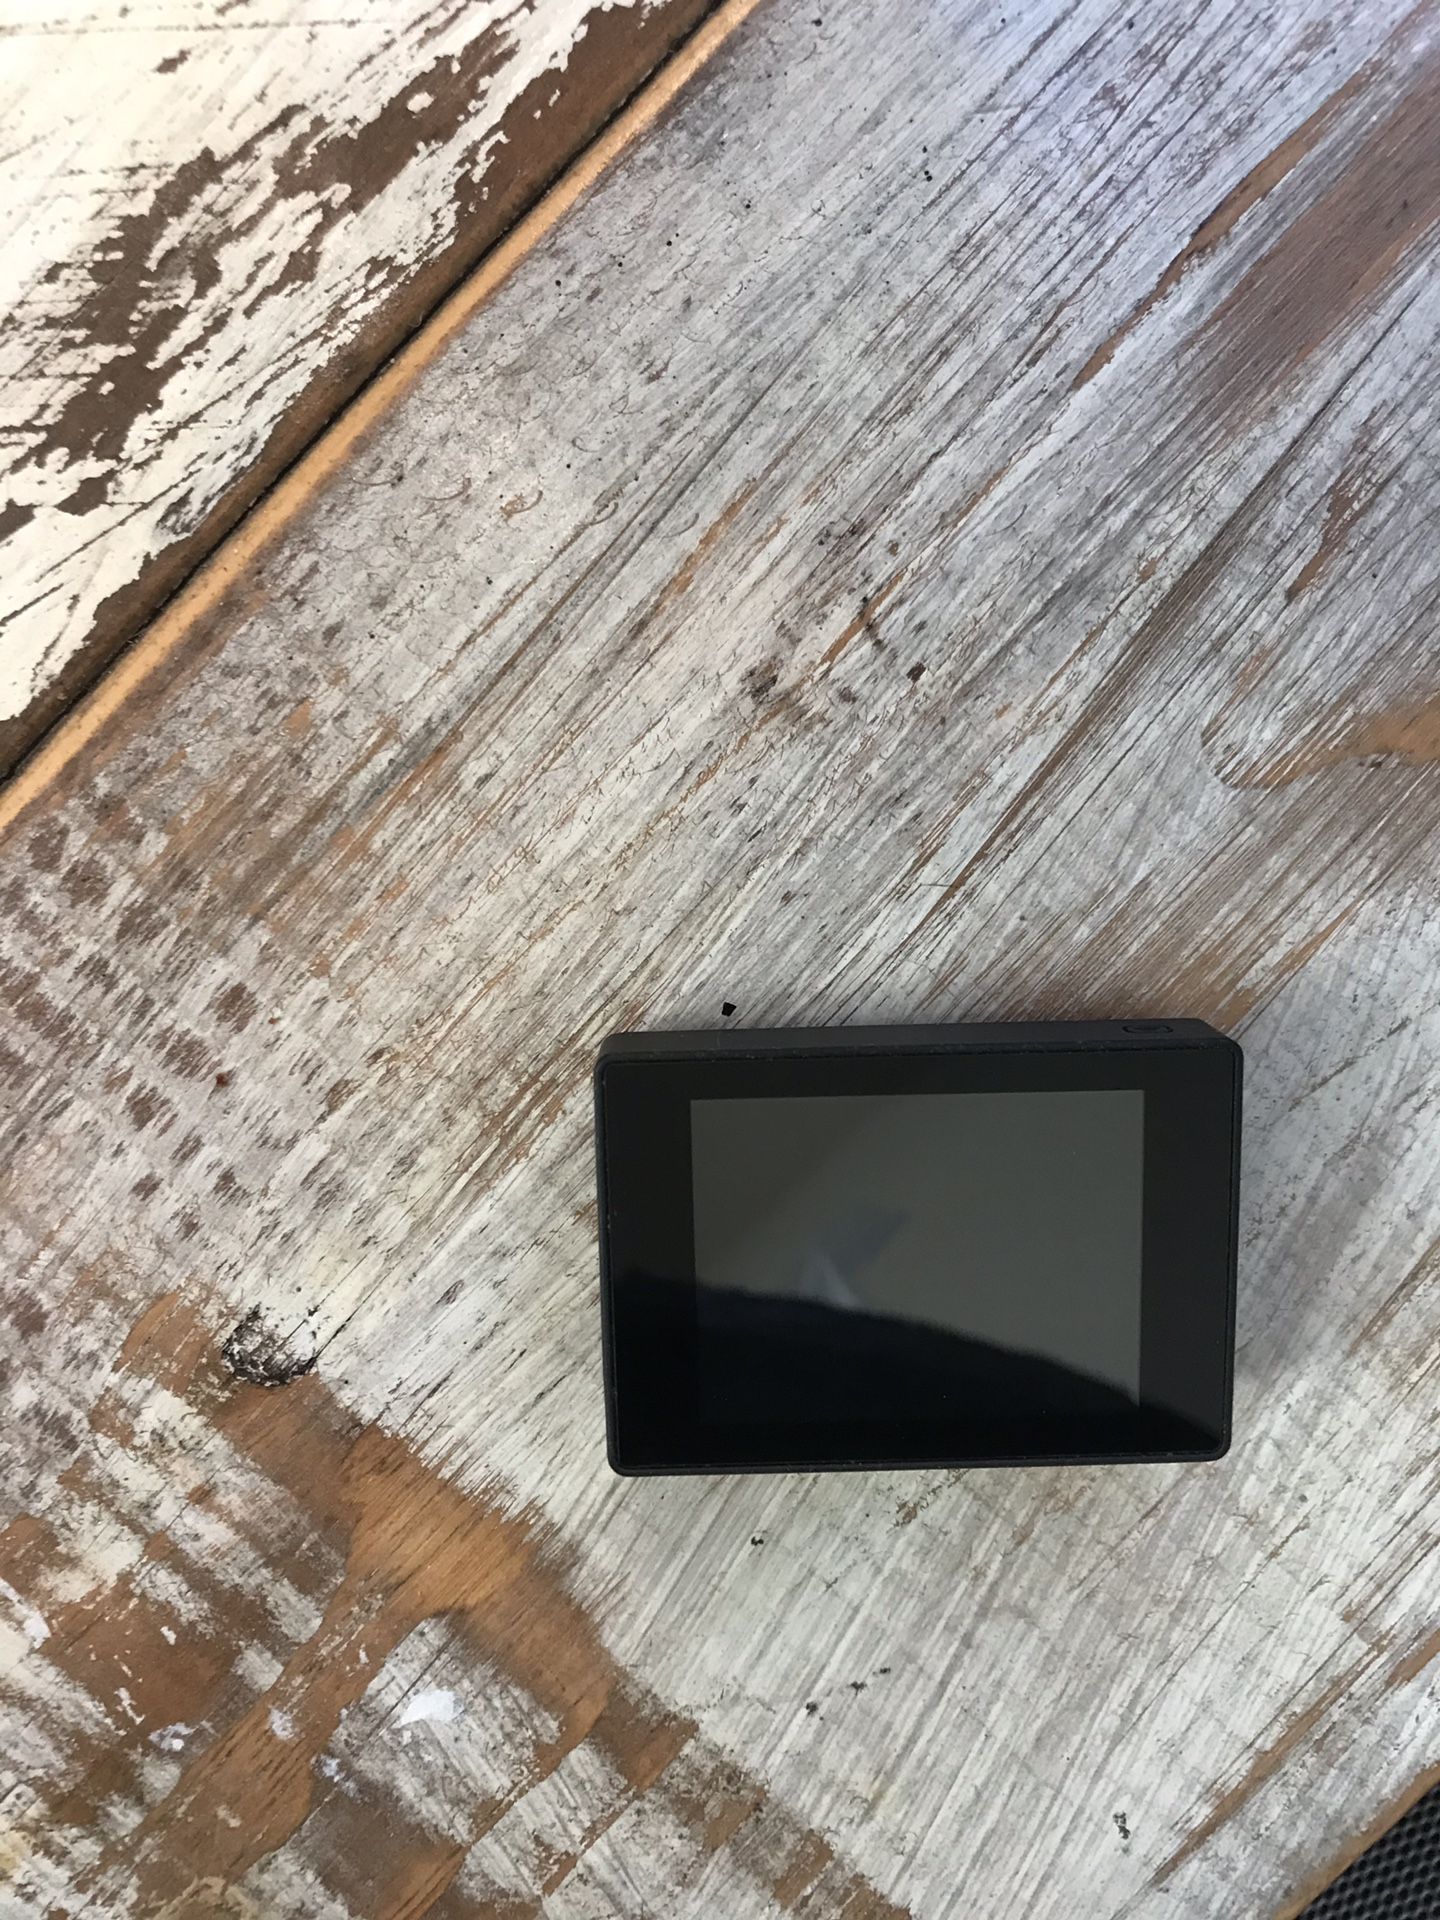 GoPro bacpac LCD touch screen